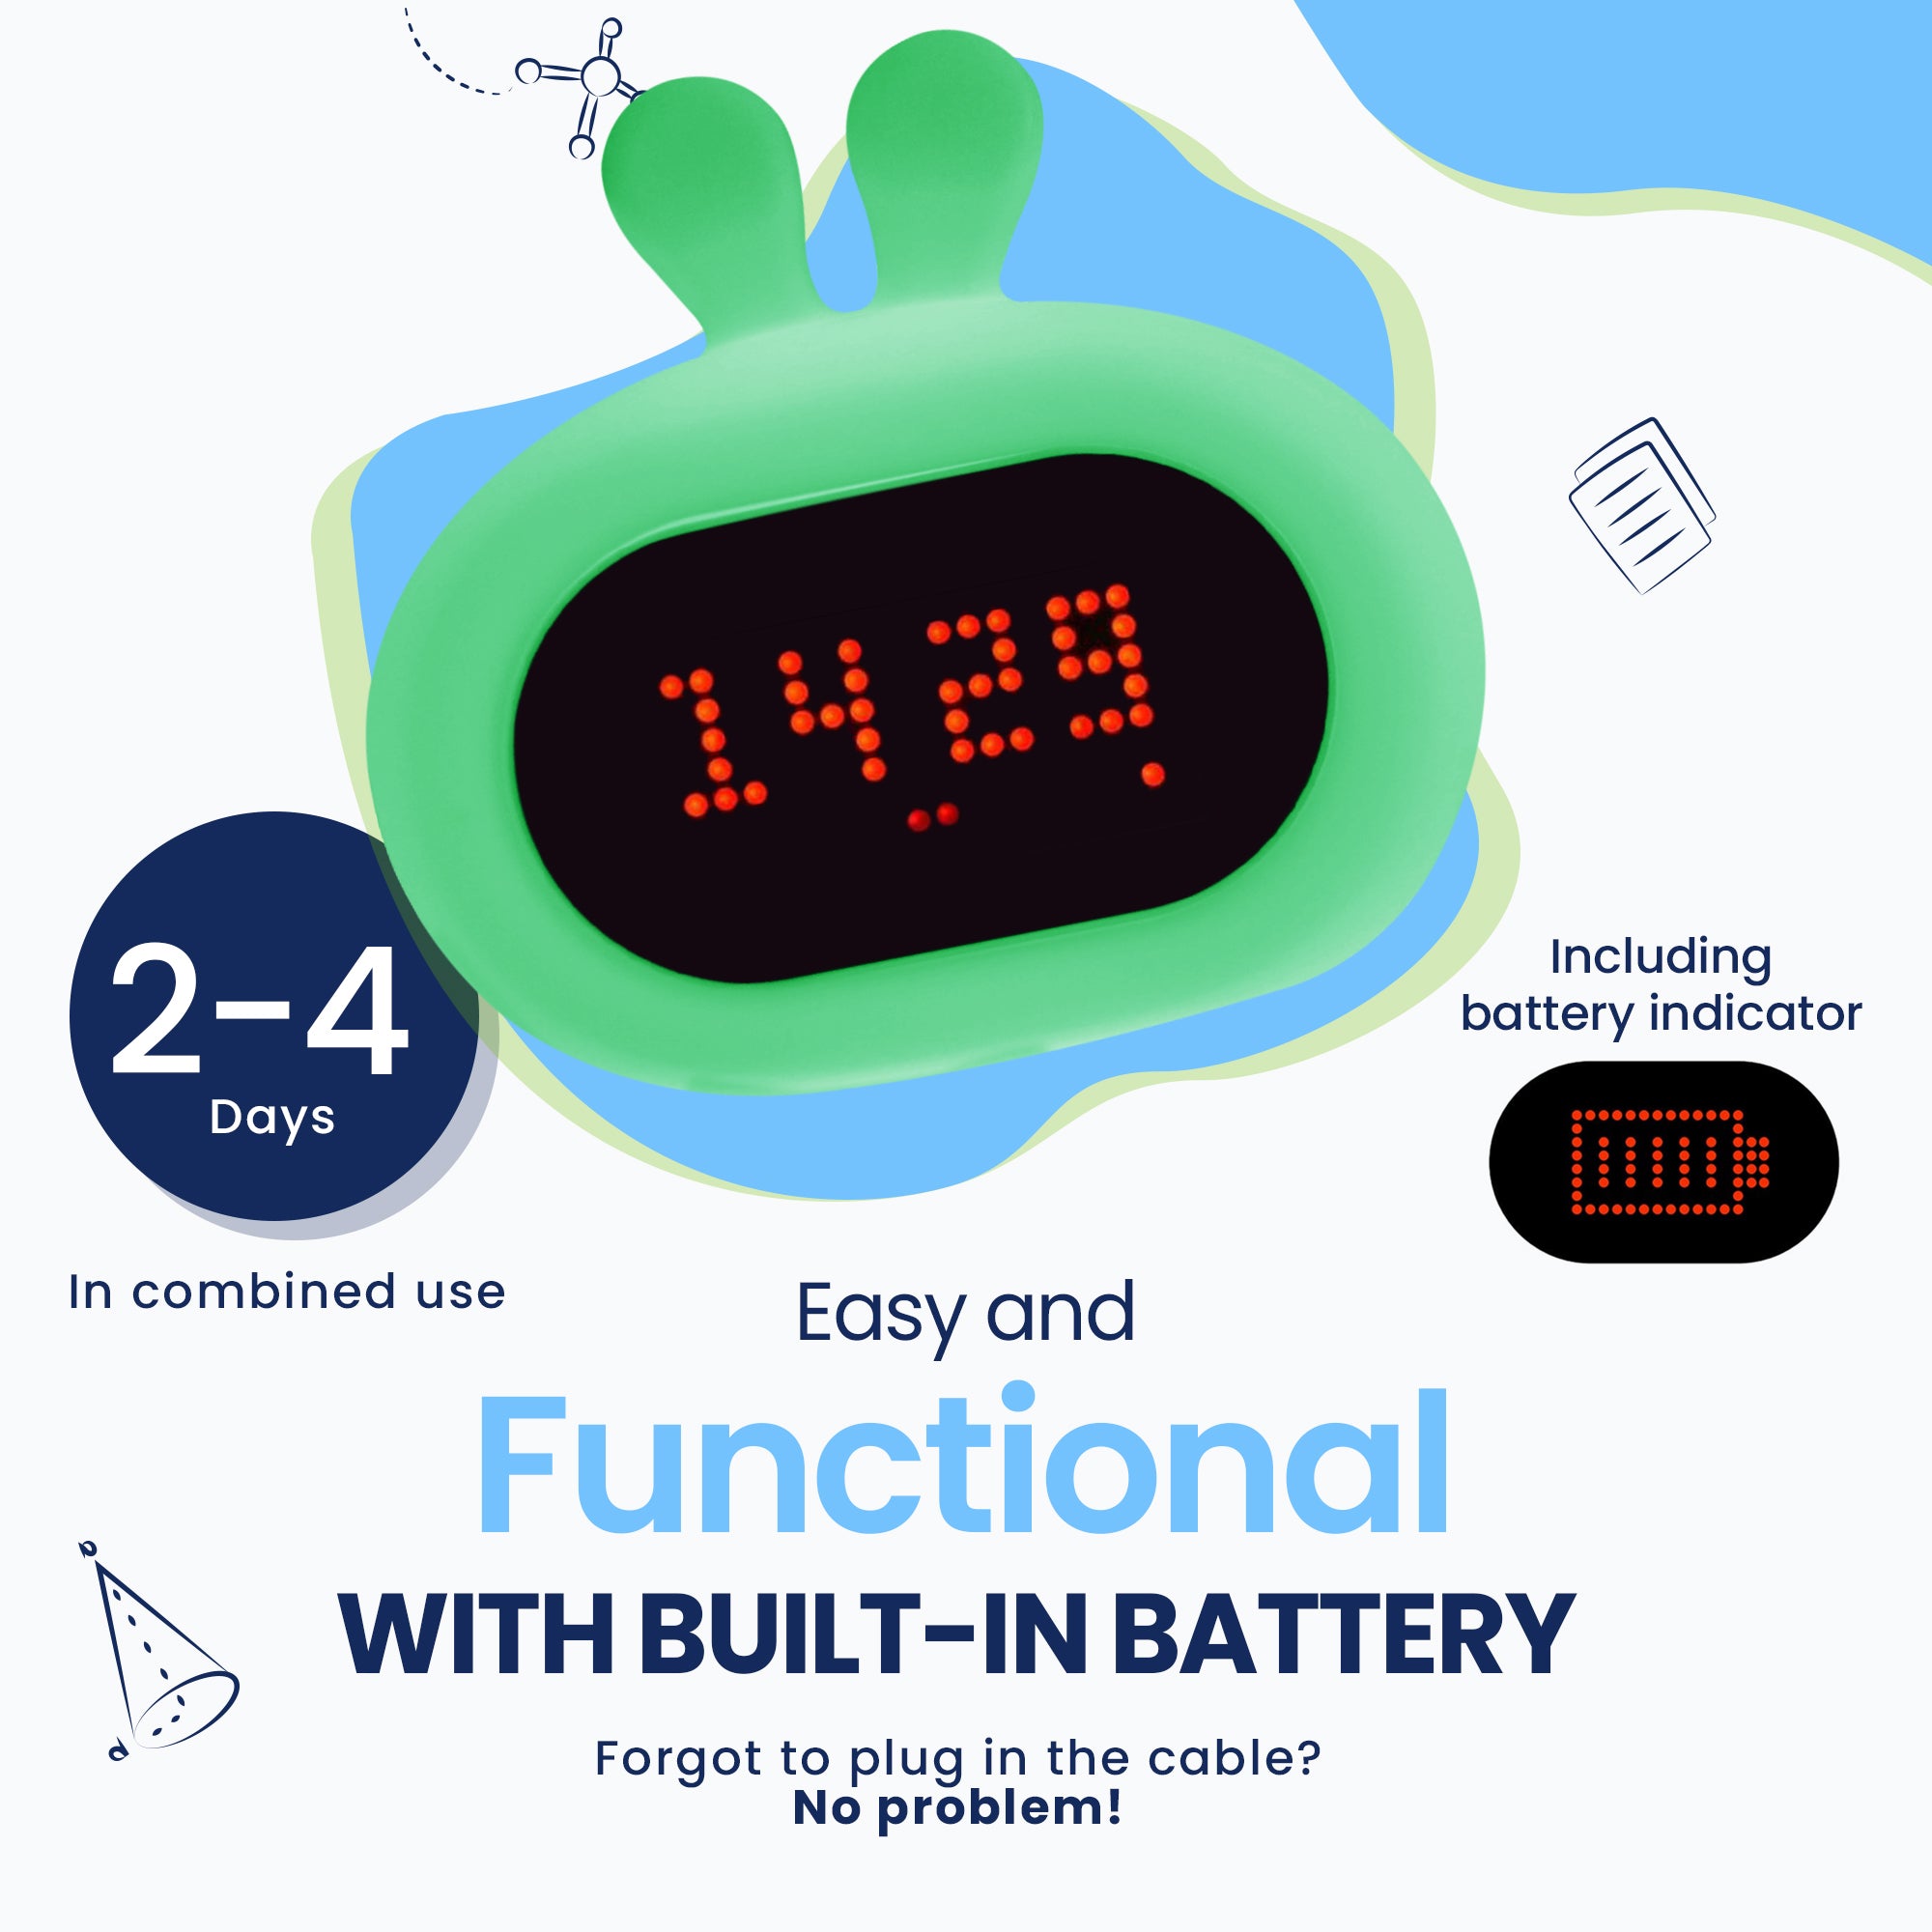 The Rabbit children's alarm clock lasts for several days in combined use and has a standby time of more than 200 hours, all thanks to the built-in battery!